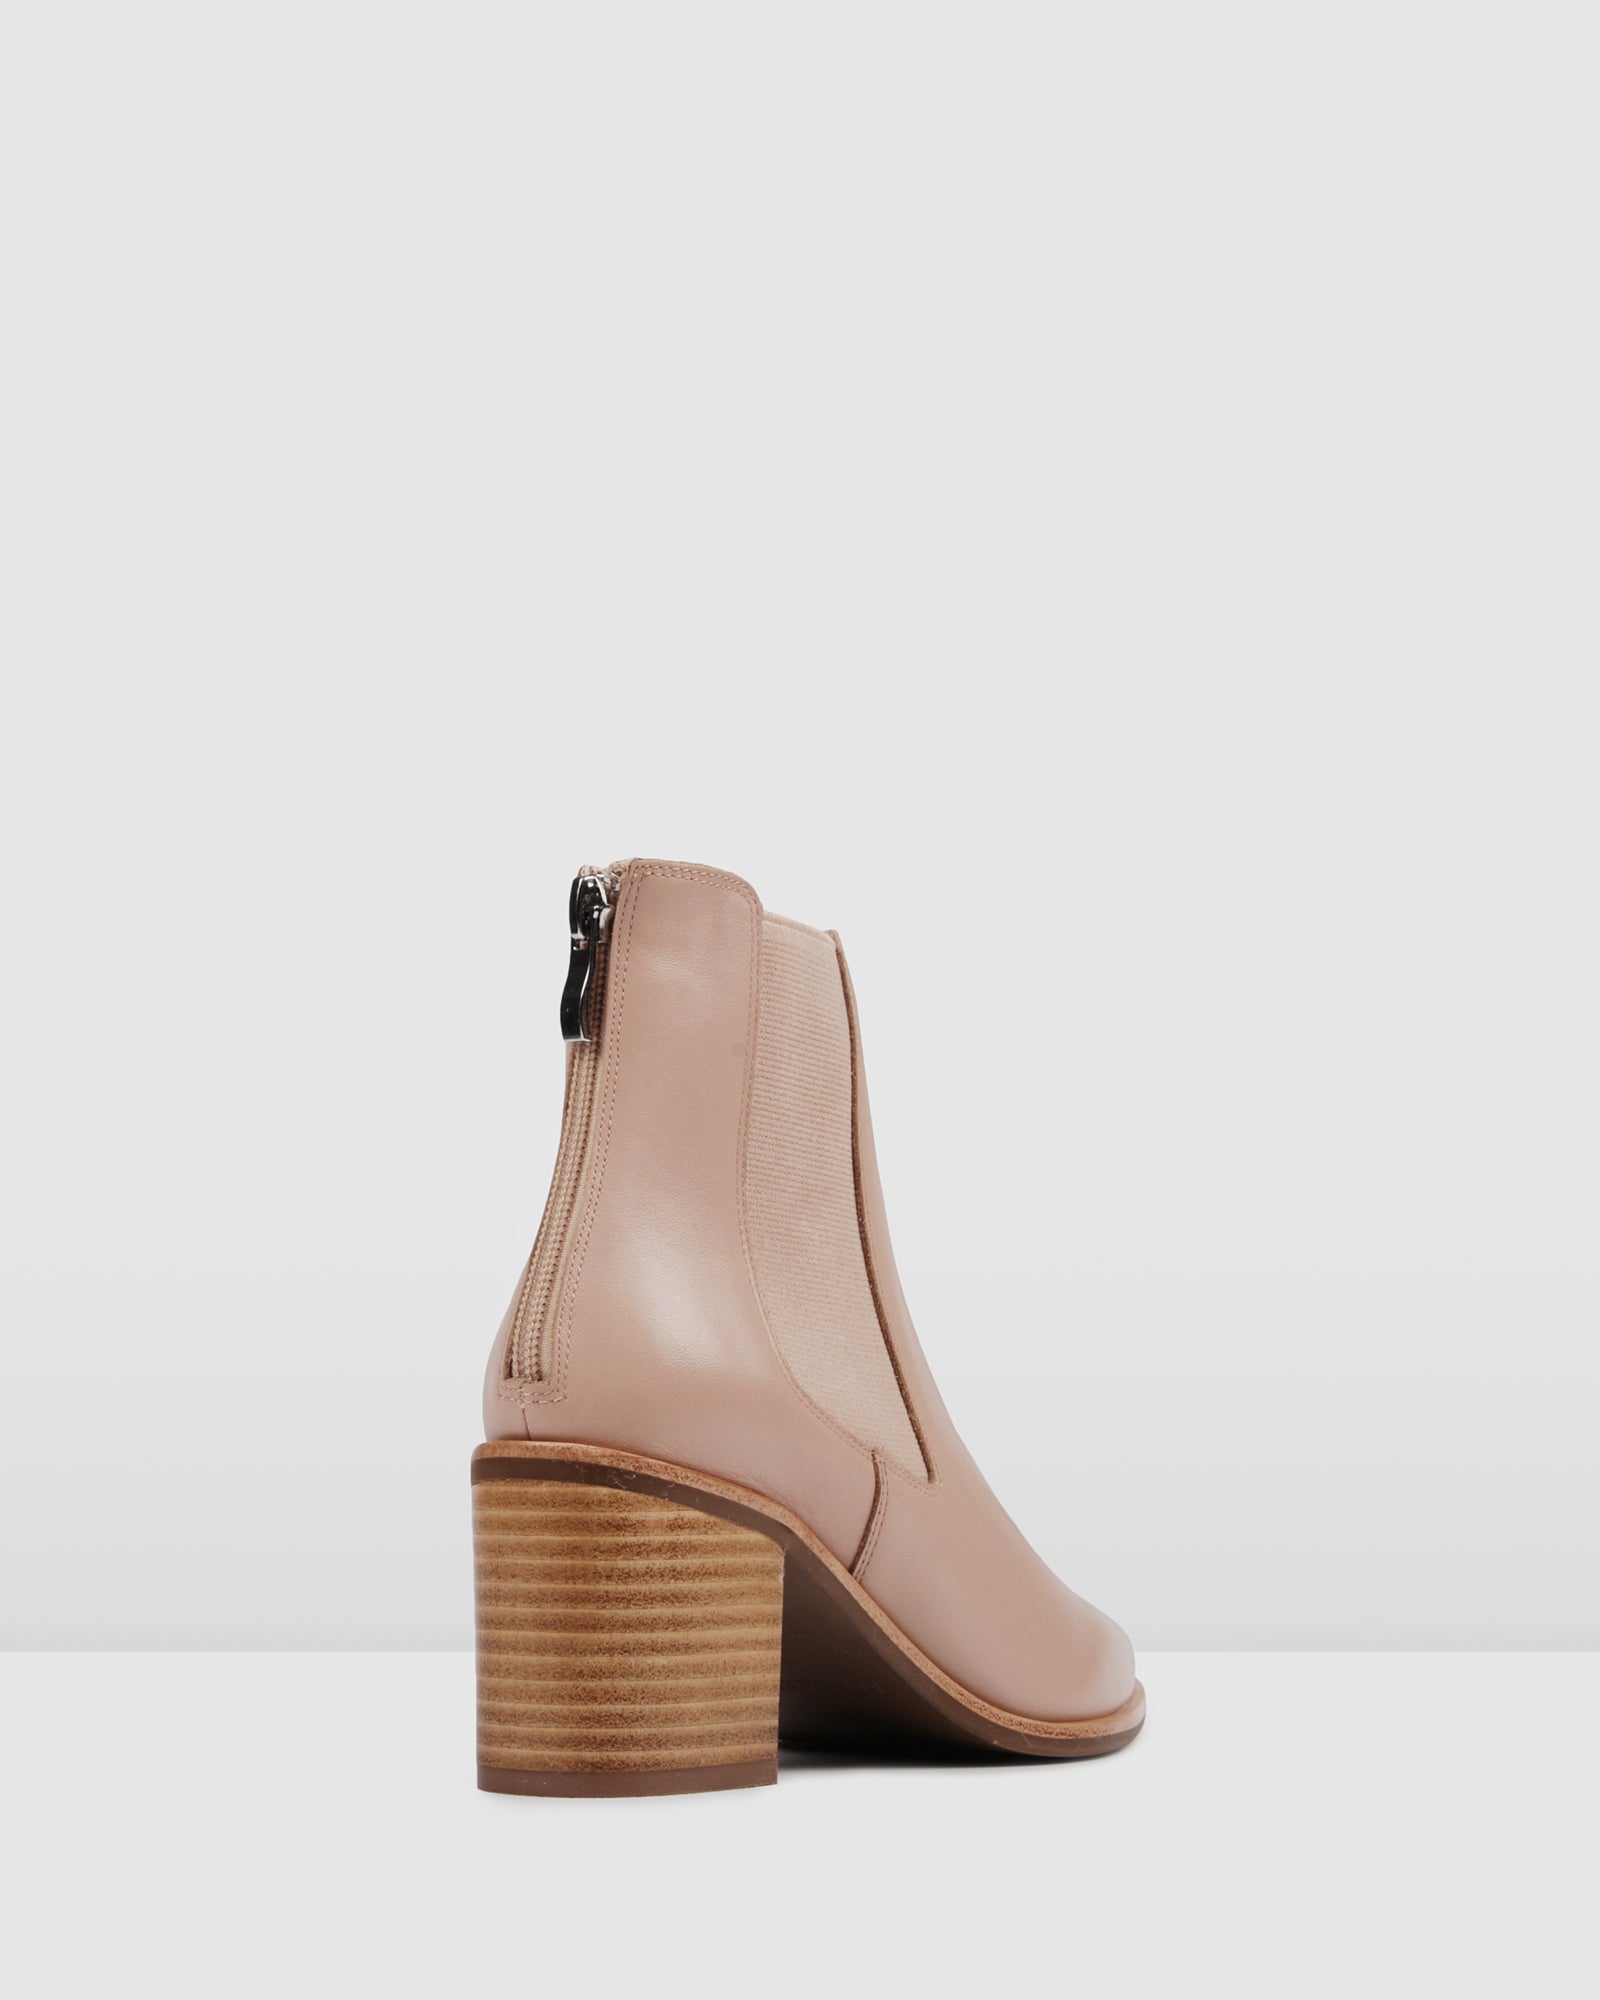 ALLURE MID ANKLE BOOTS BEIGE LEATHER 